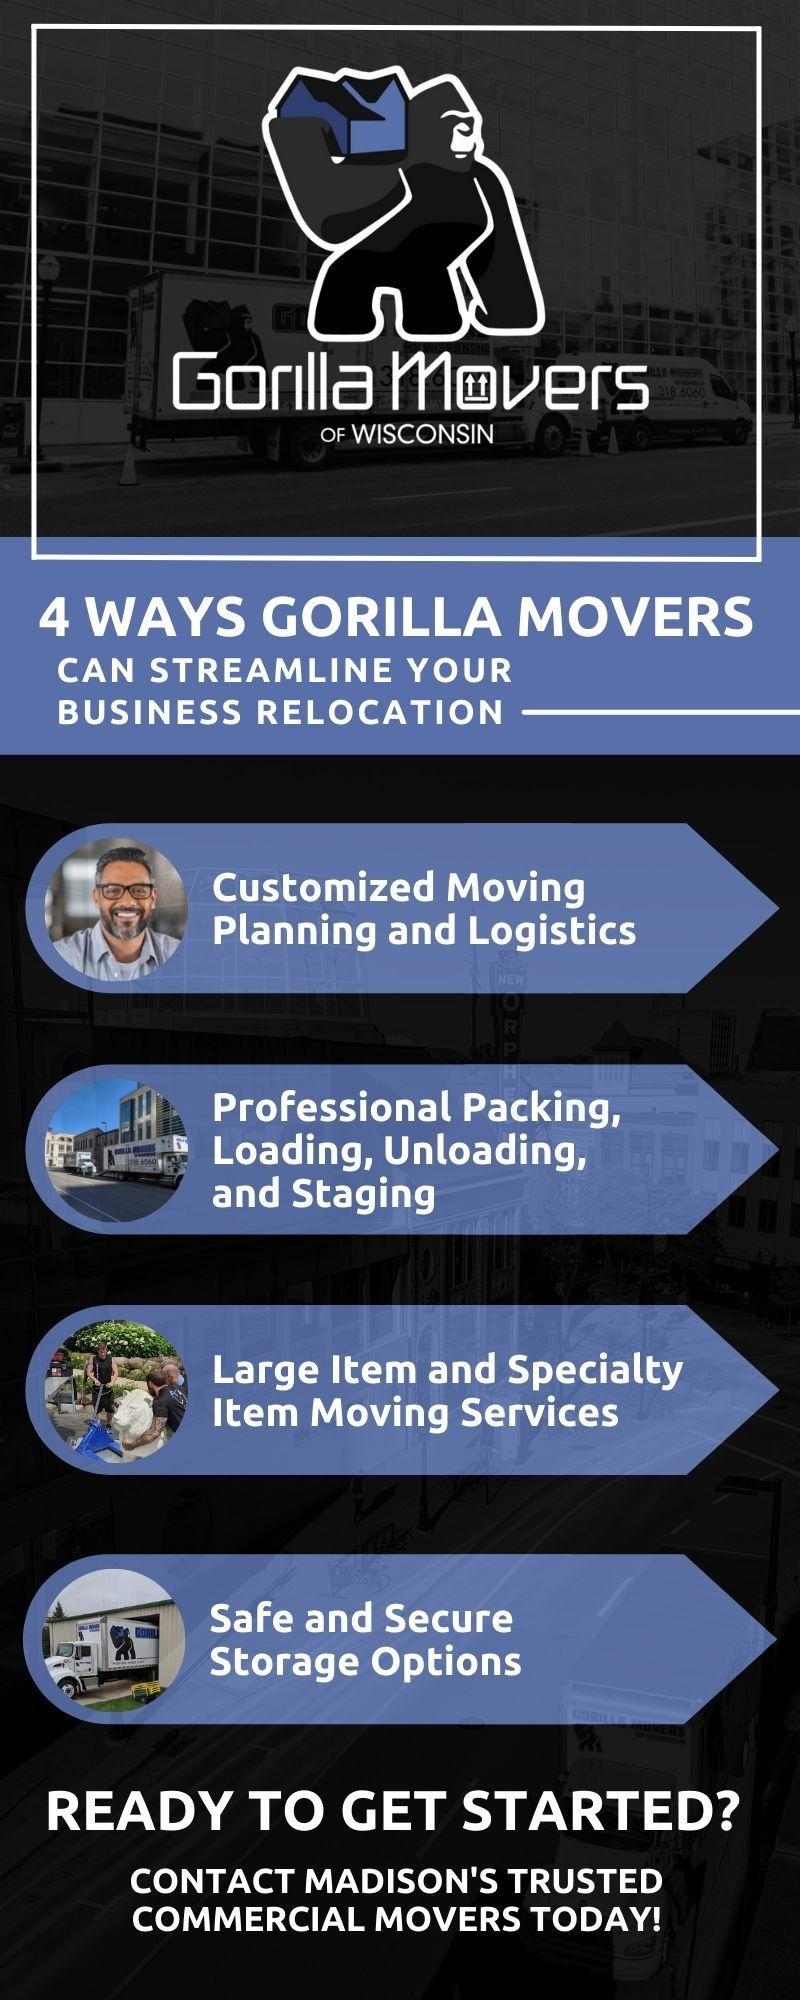 4+Ways+Gorilla+Movers+Can+Streamline+Your+Business+Relocation+Infographic.jpg